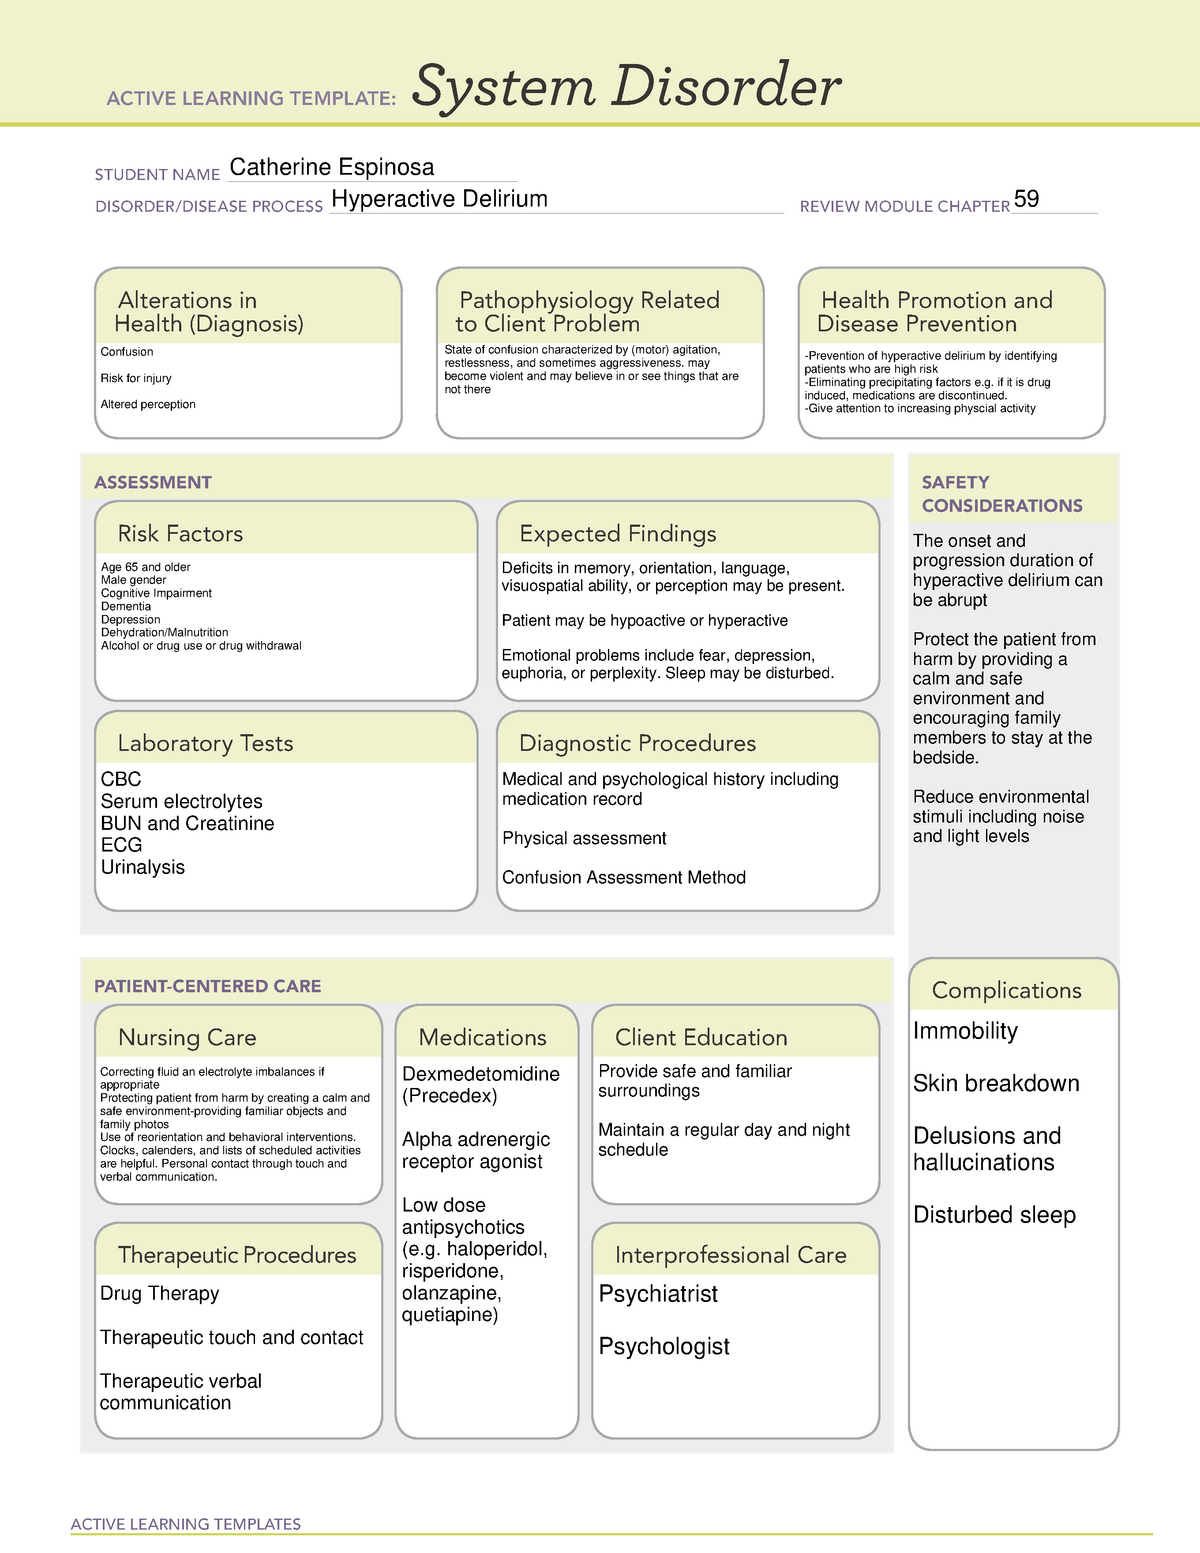 Hyperactive Delirium System Disorder ACTIVE LEARNING TEMPLATES System